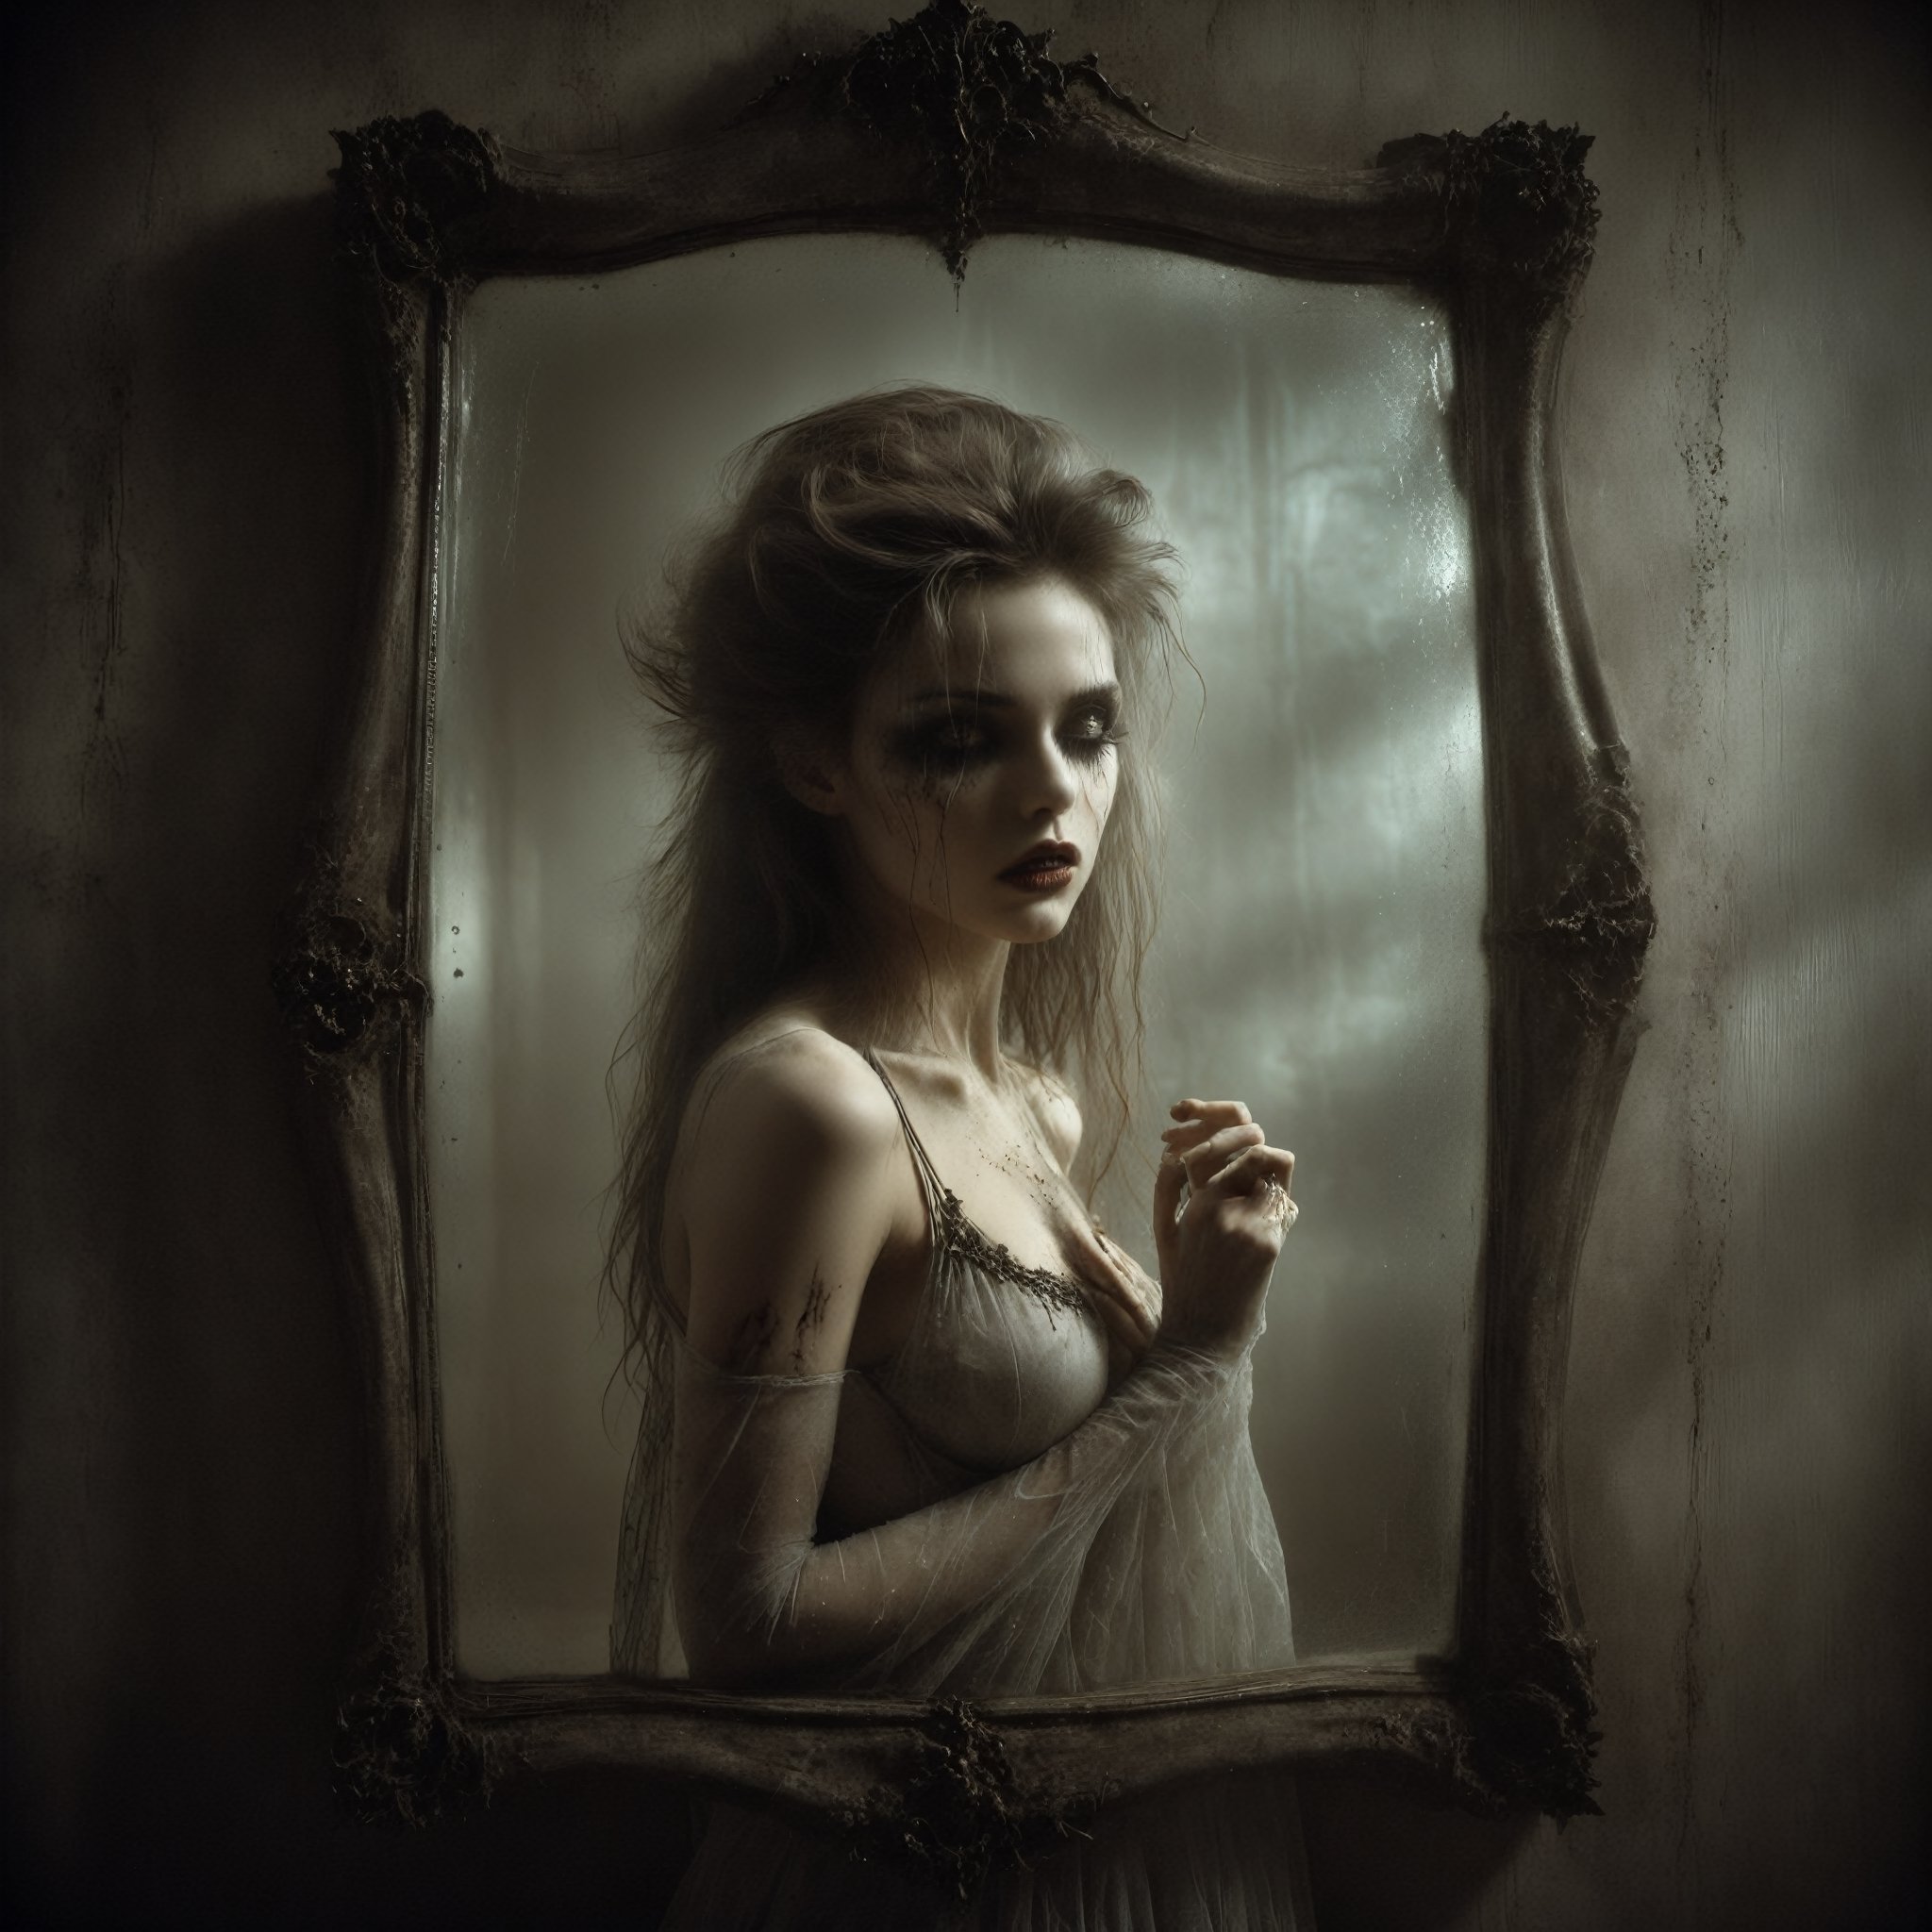 In the dimly lit vintage-style bedroom, the reflection of an attractive young woman comes to life in a large mirror that bears the scars of time—a surface marred by dirt, dust, and visible cracks. Through the obscured reflection, the alluring figure of the young woman is adorned in transparent garments, adding an air of mystery and sensuality to the scene. The combination of the aged mirror and the woman's captivating presence creates a visual narrative that transcends time and tells a story of both elegance and decay,Luis Royo,Movie Still,darkart, Victoria Frances style, dark, terrifying, vampiric,DissolveSdxl0,Contained Color